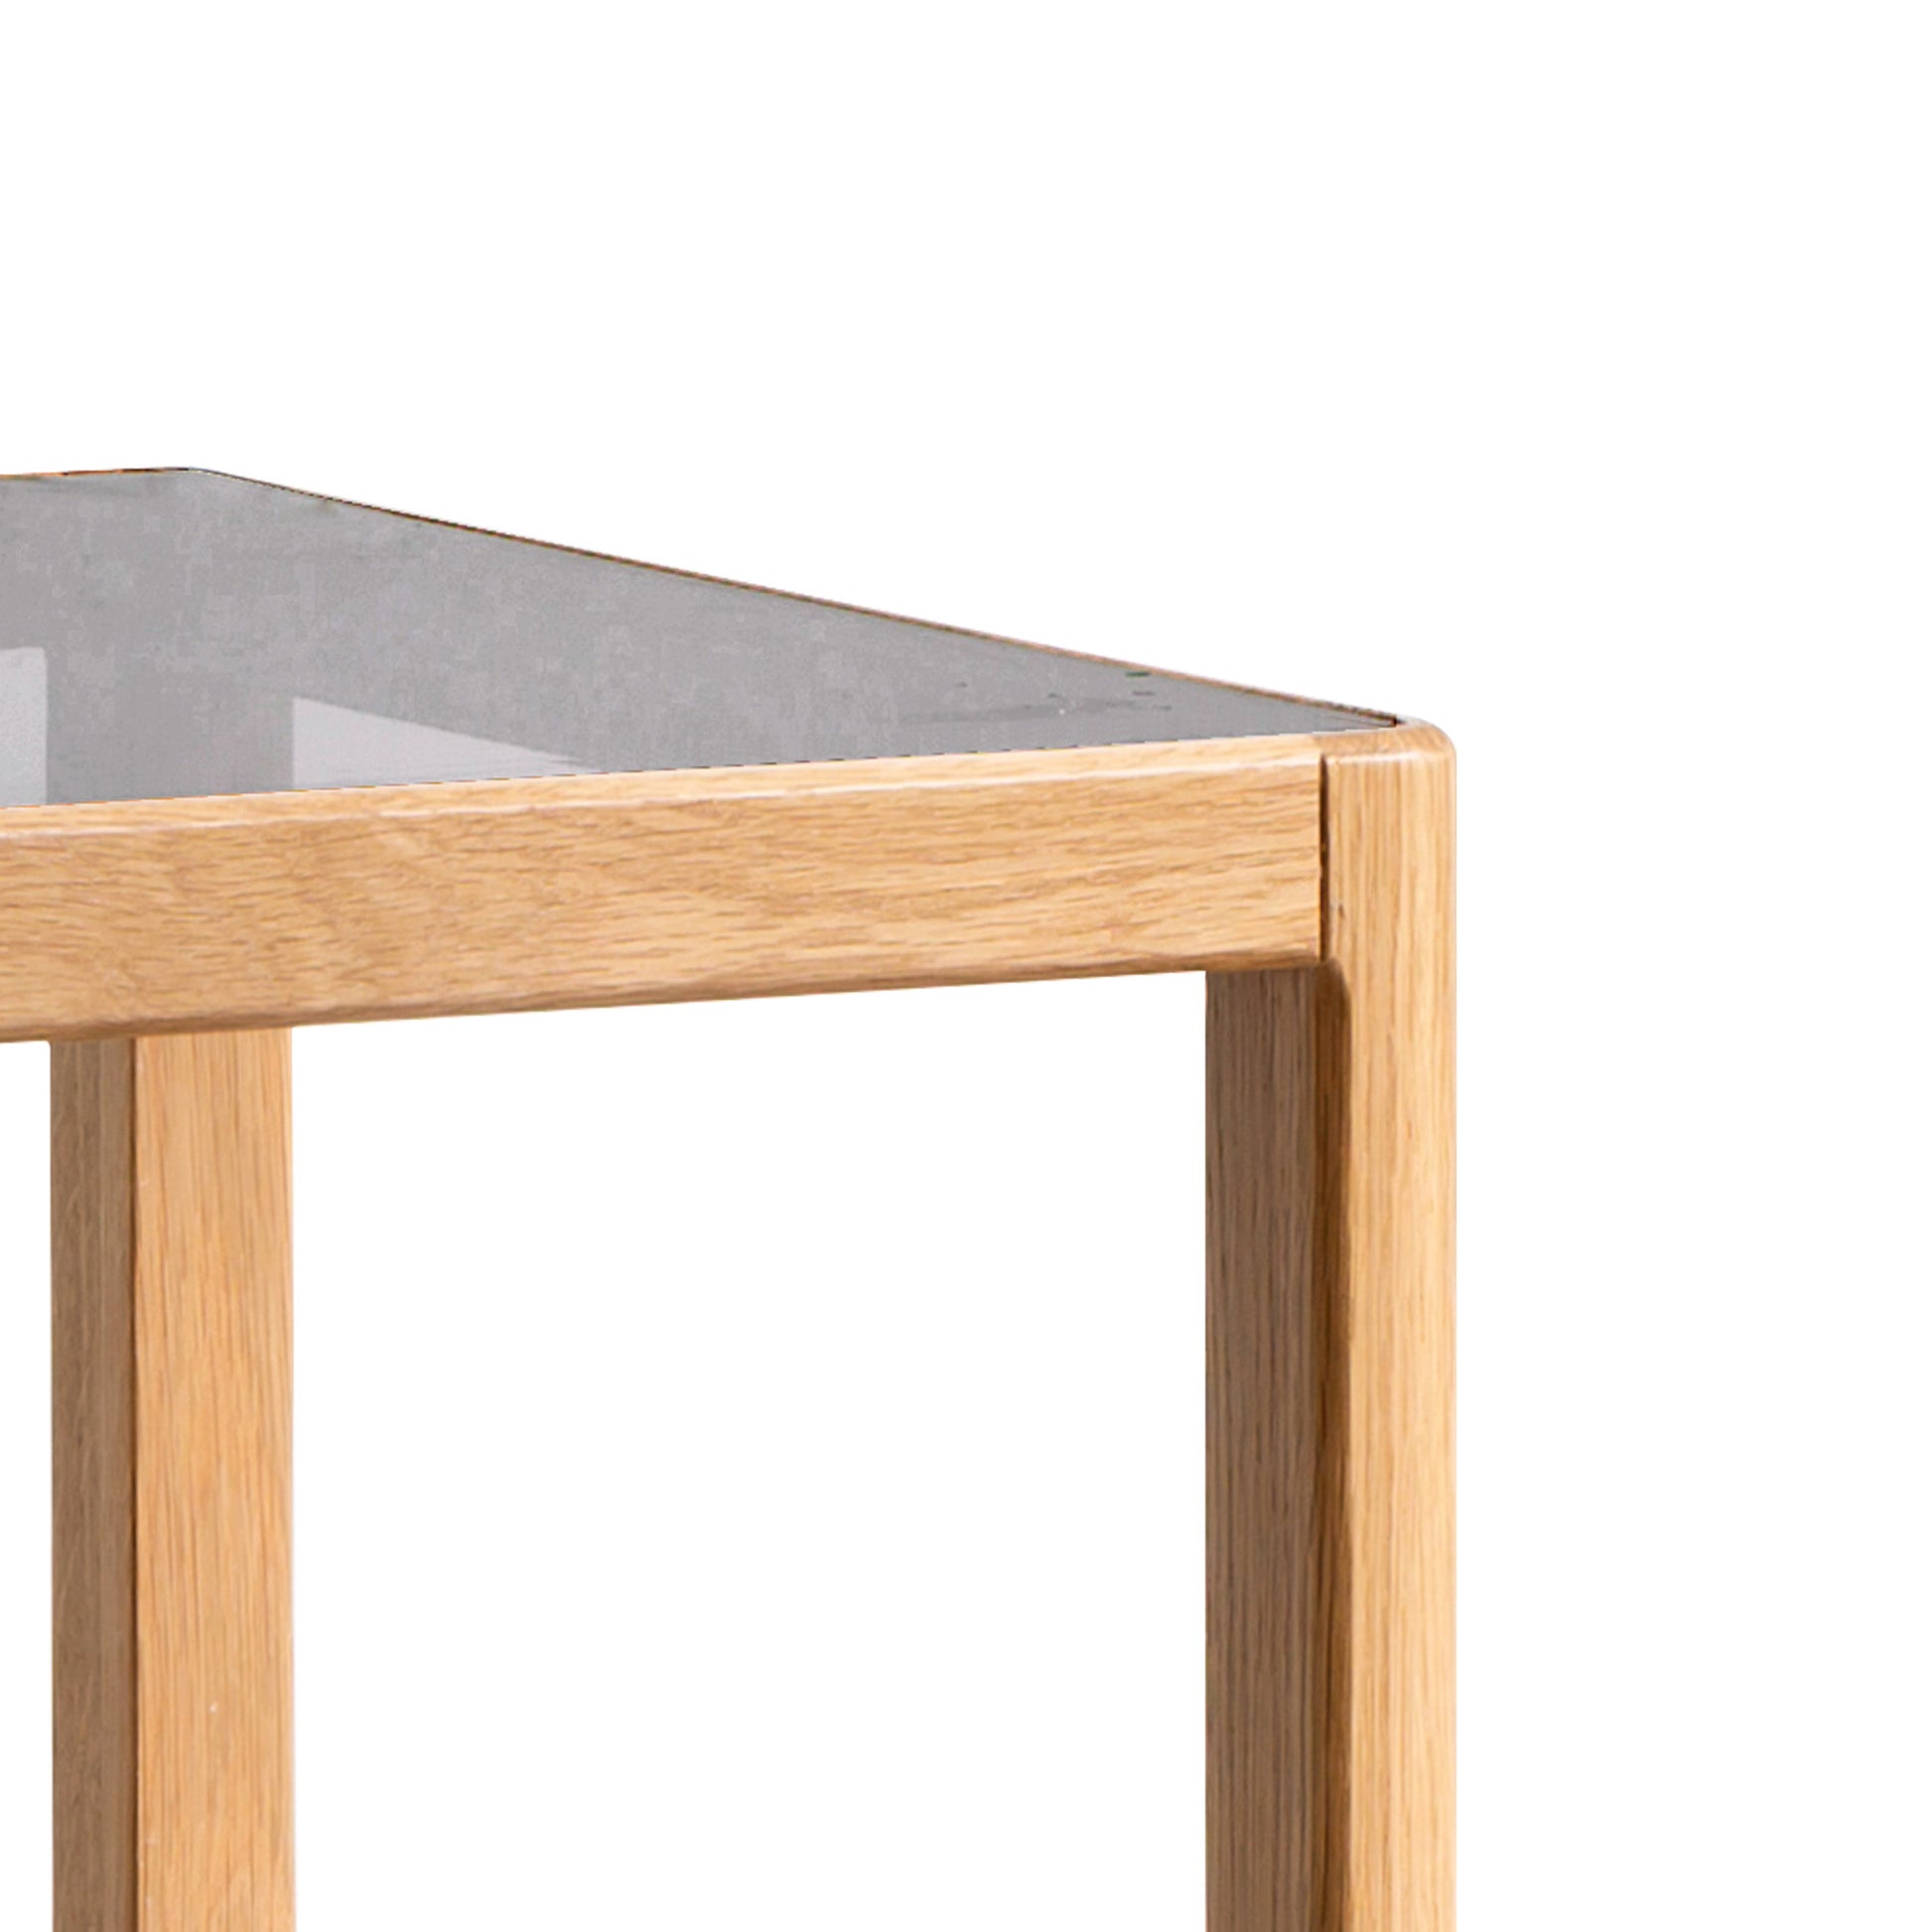 Natural Oak Wood End Table with Tempered Glass Top